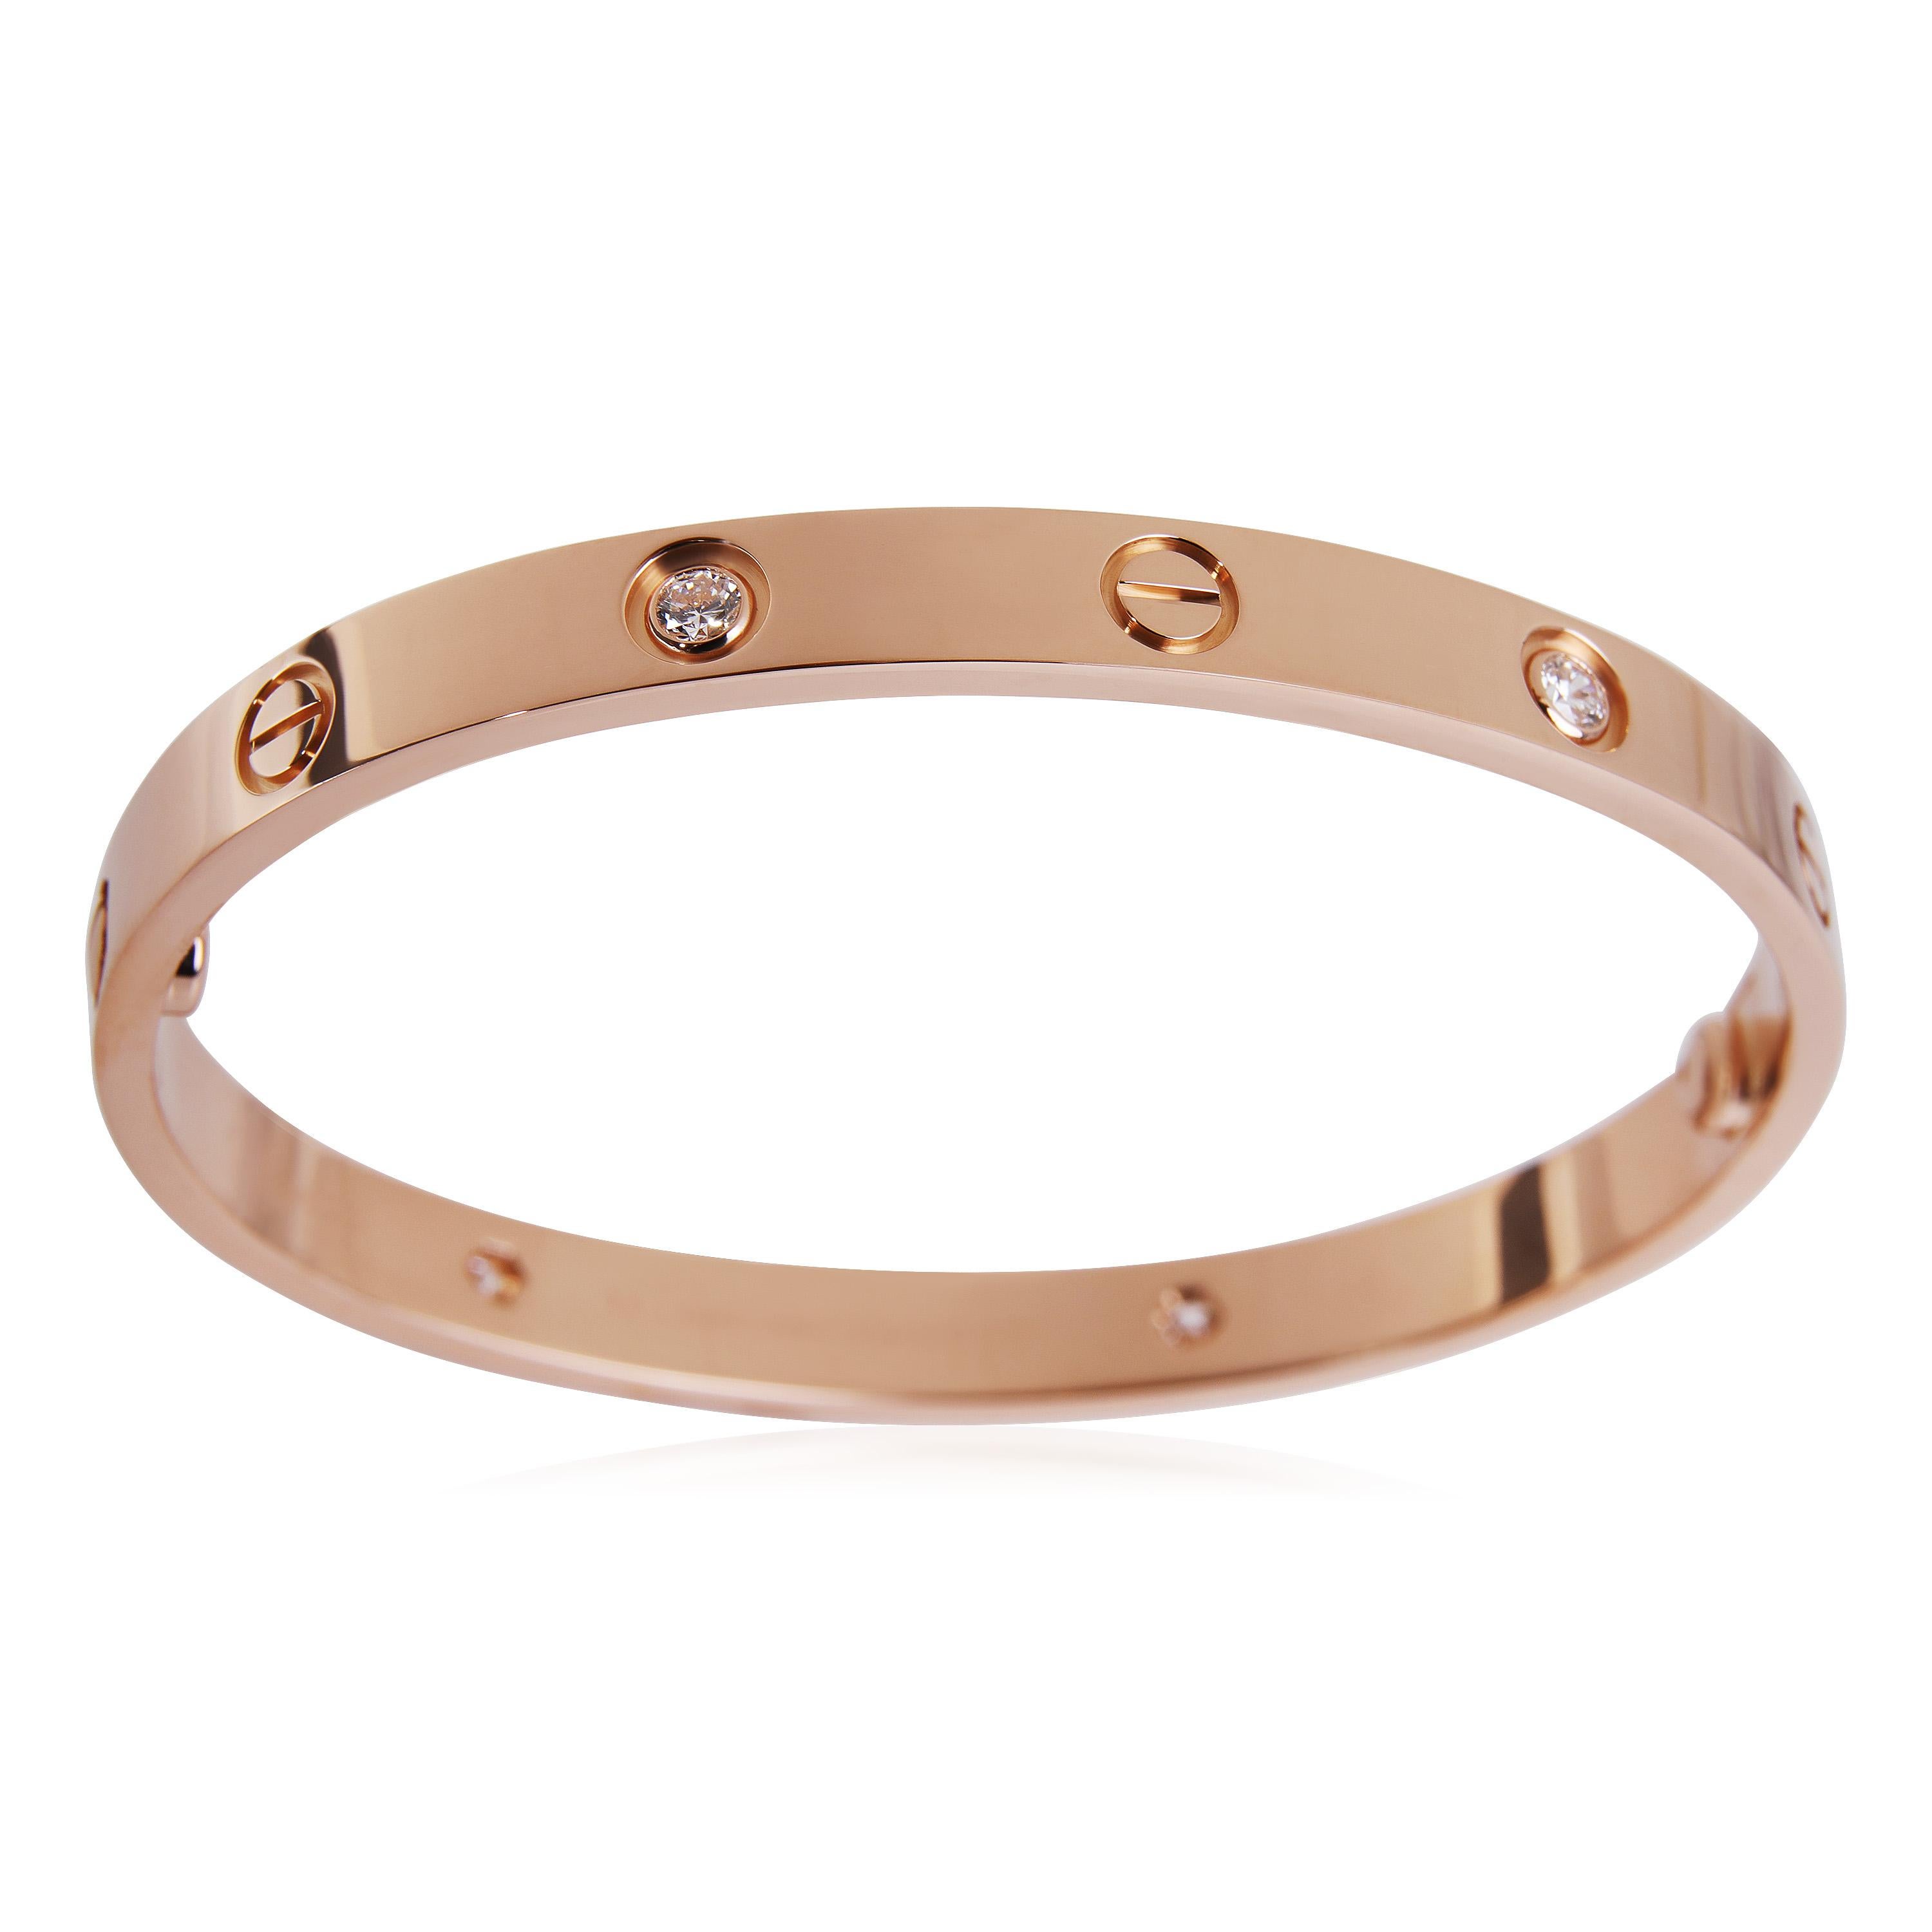 Cartier Love Diamond Bracelet in 18K Rose Gold (Size 17)

PRIMARY DETAILS
SKU: 120292
Listing Title: Cartier Love Diamond Bracelet in 18K Rose Gold (Size 17)
Condition Description: Retails for 11100 USD. In excellent condition. Size 17. Comes with